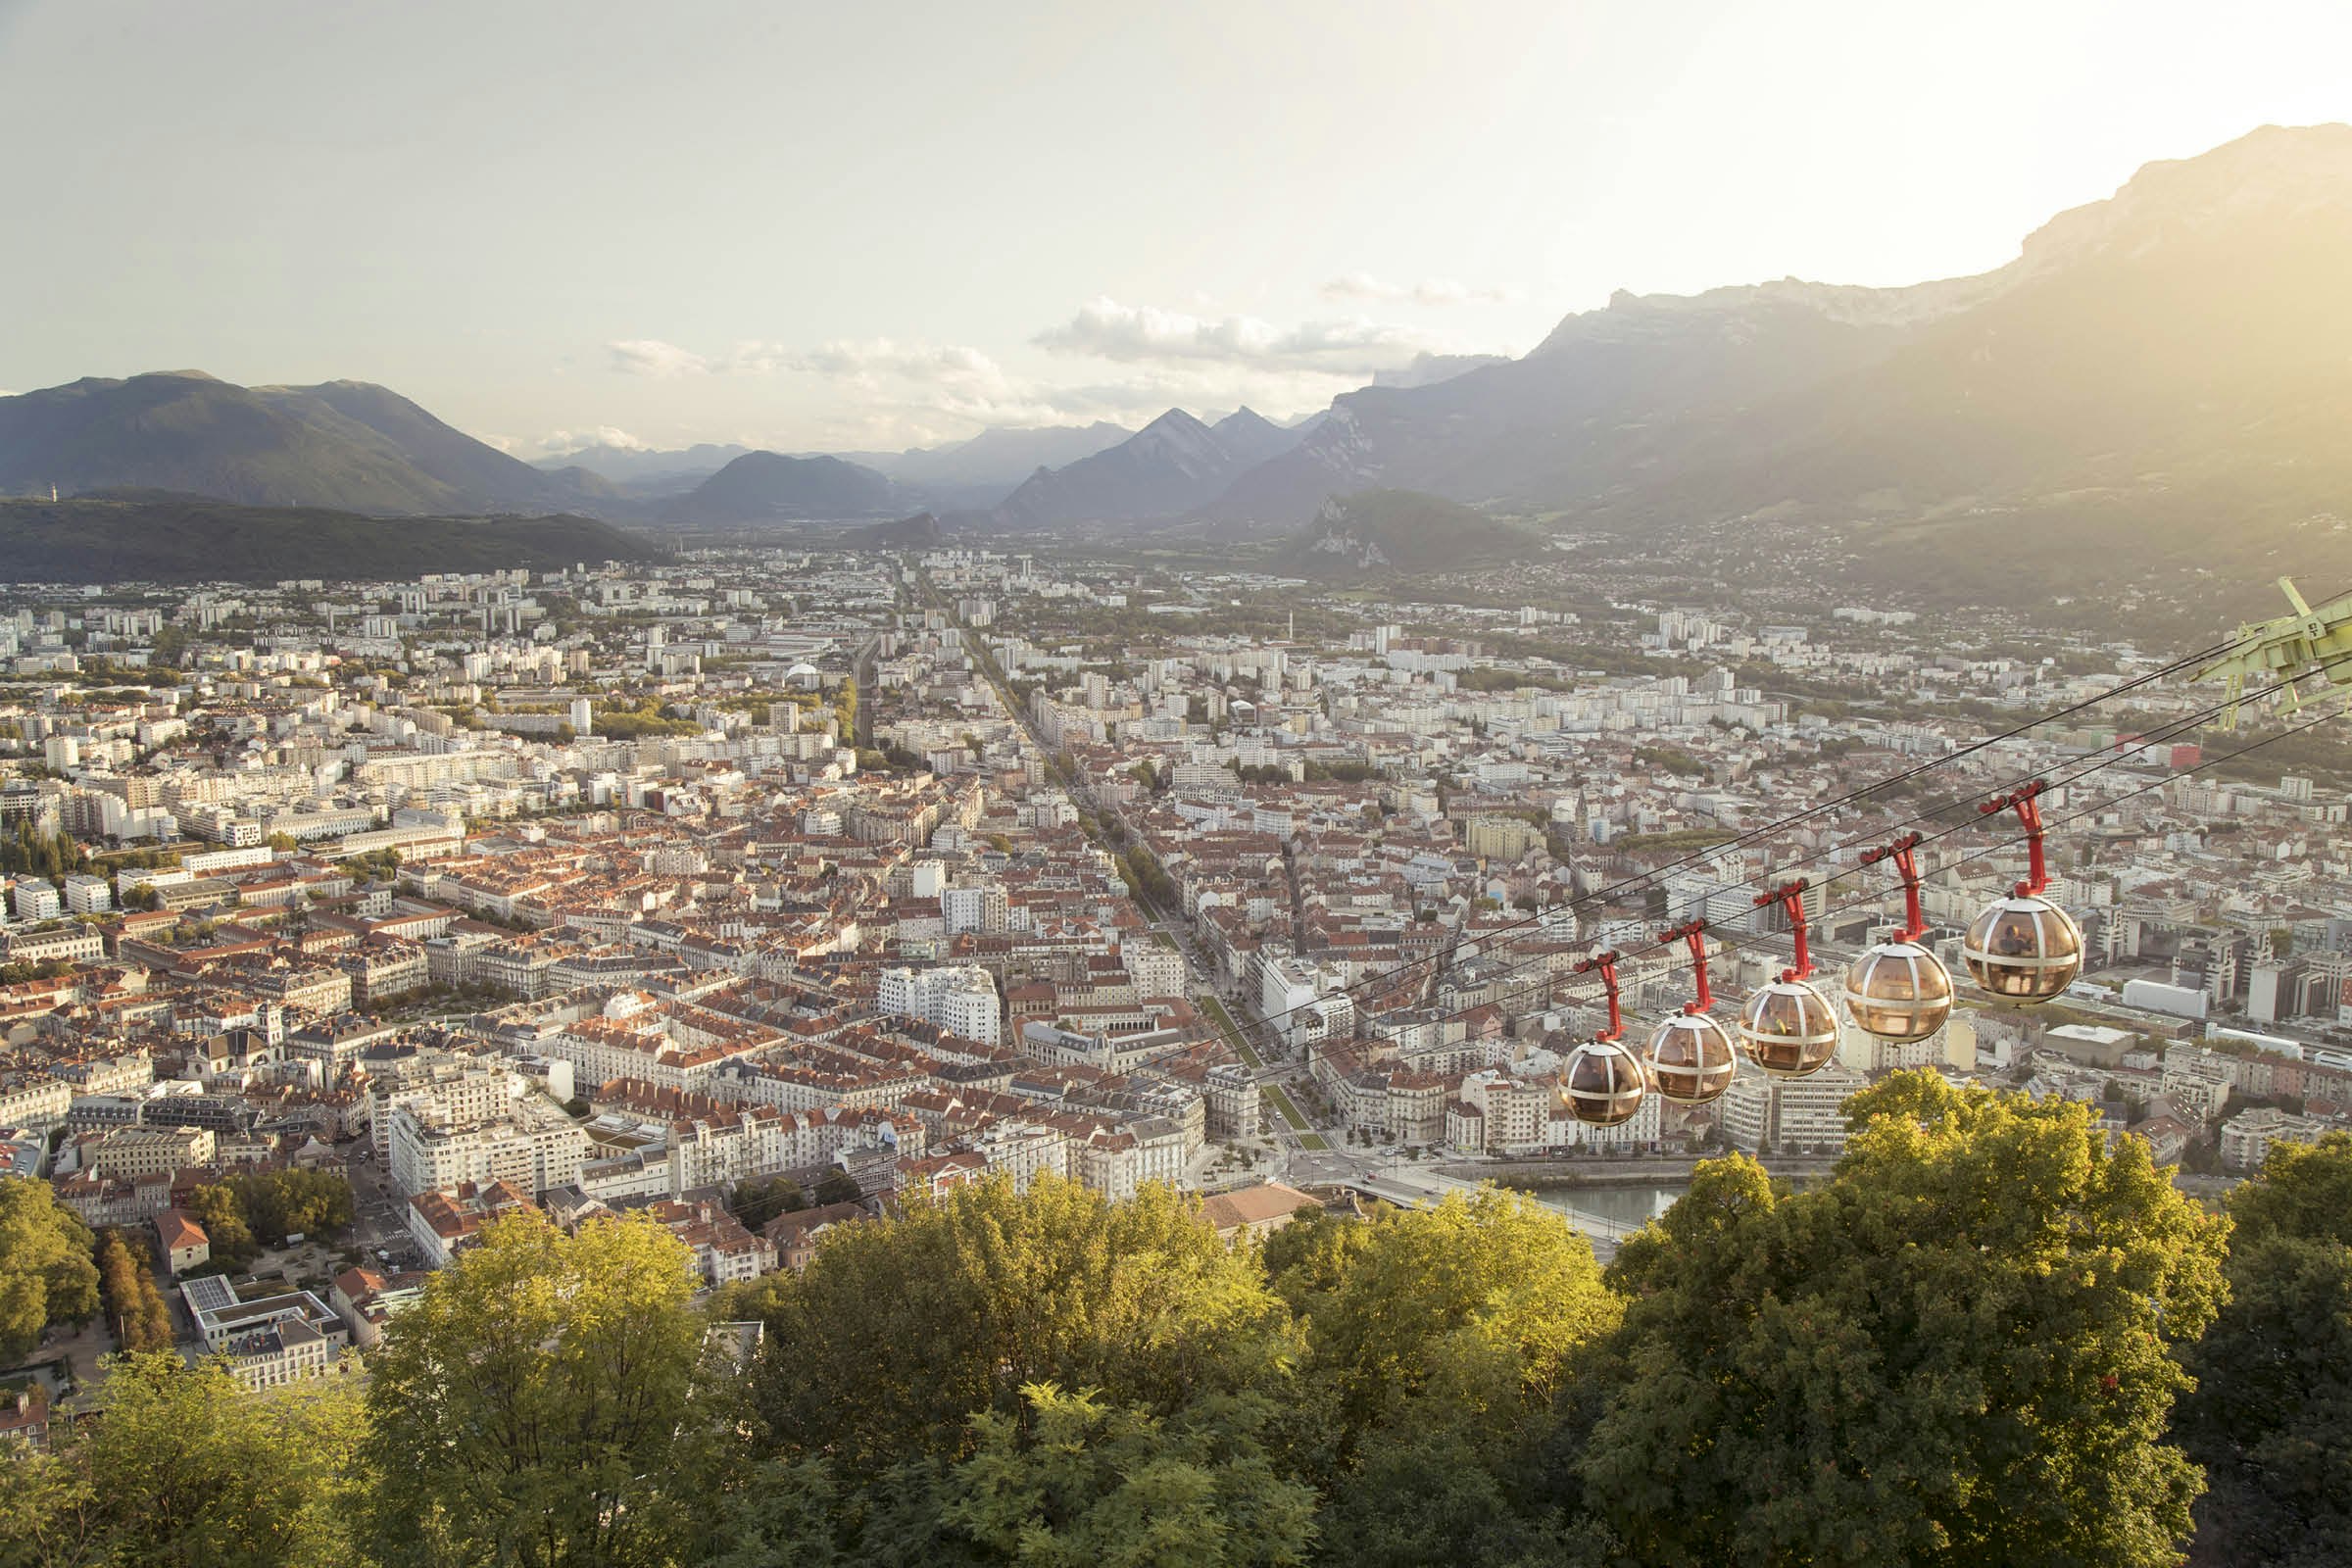 A mountaintop view over the centre and suburbs of Grenoble